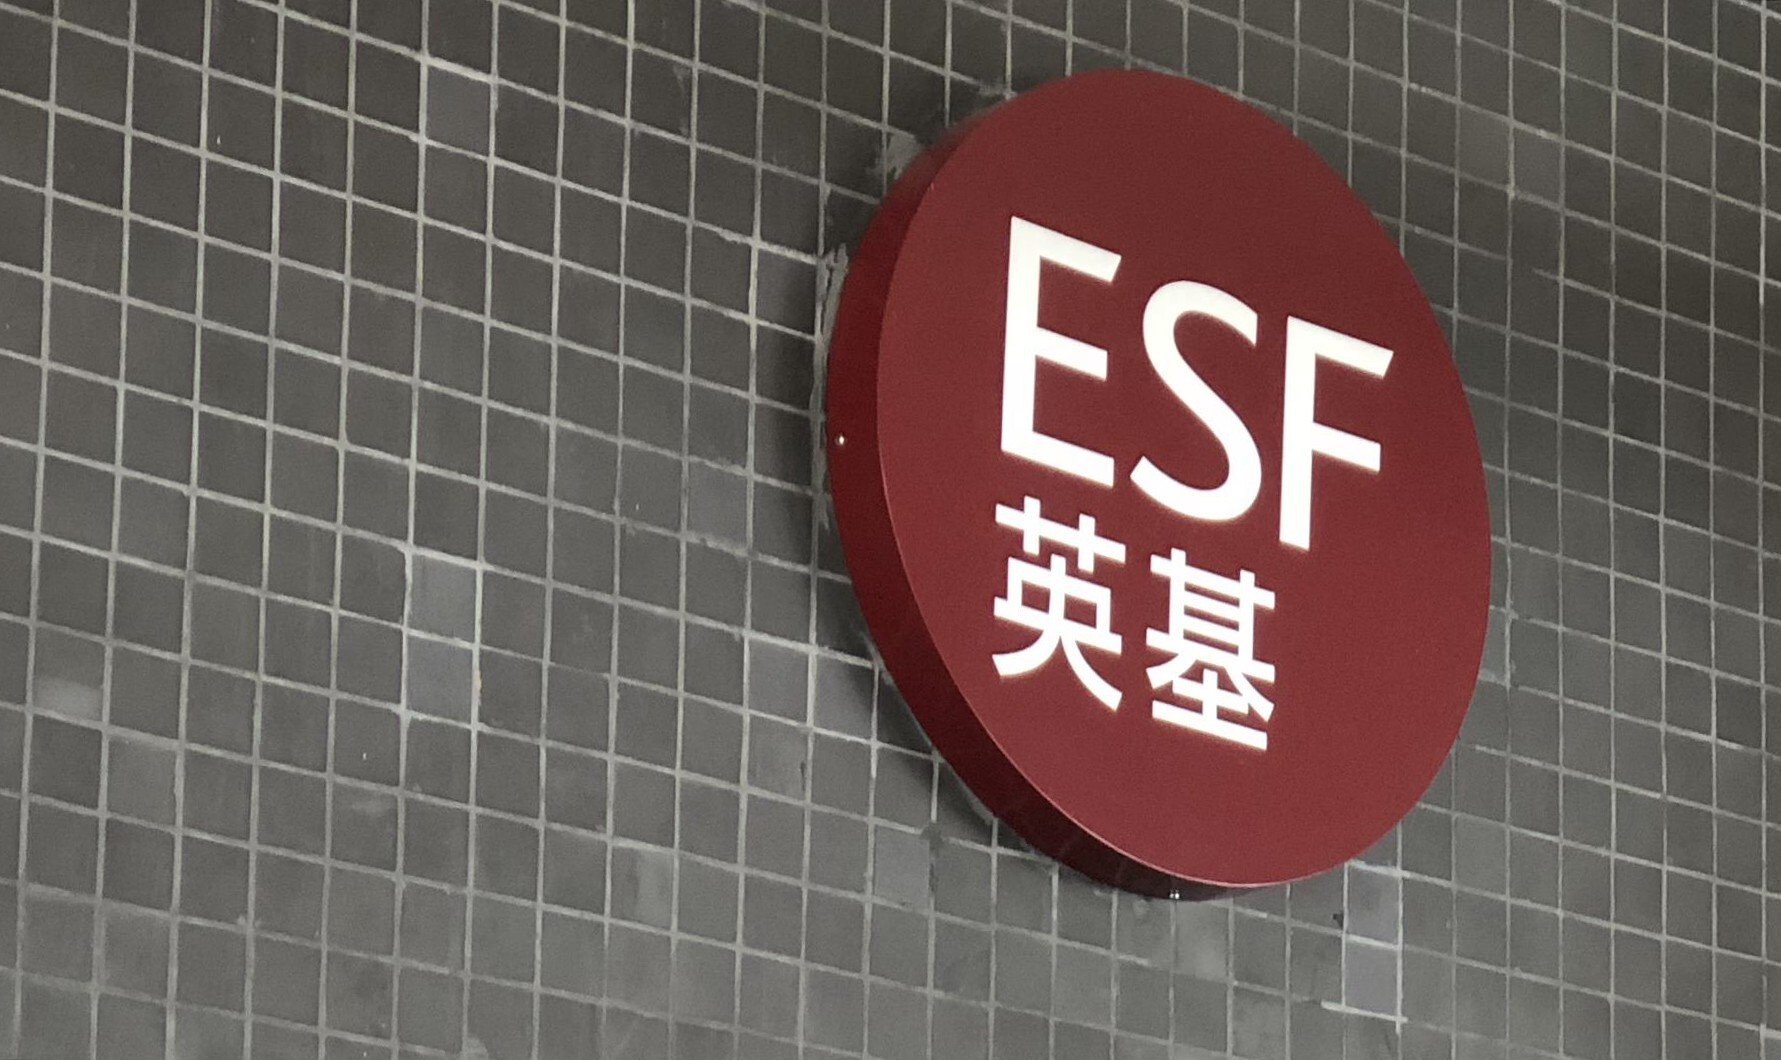 ESF schools make up 22 of the 52 international schools in Hong Kong, educating almost 30 per cent of the student body. Allegations accusing teachers of racism have surfaced at a number of the schools.